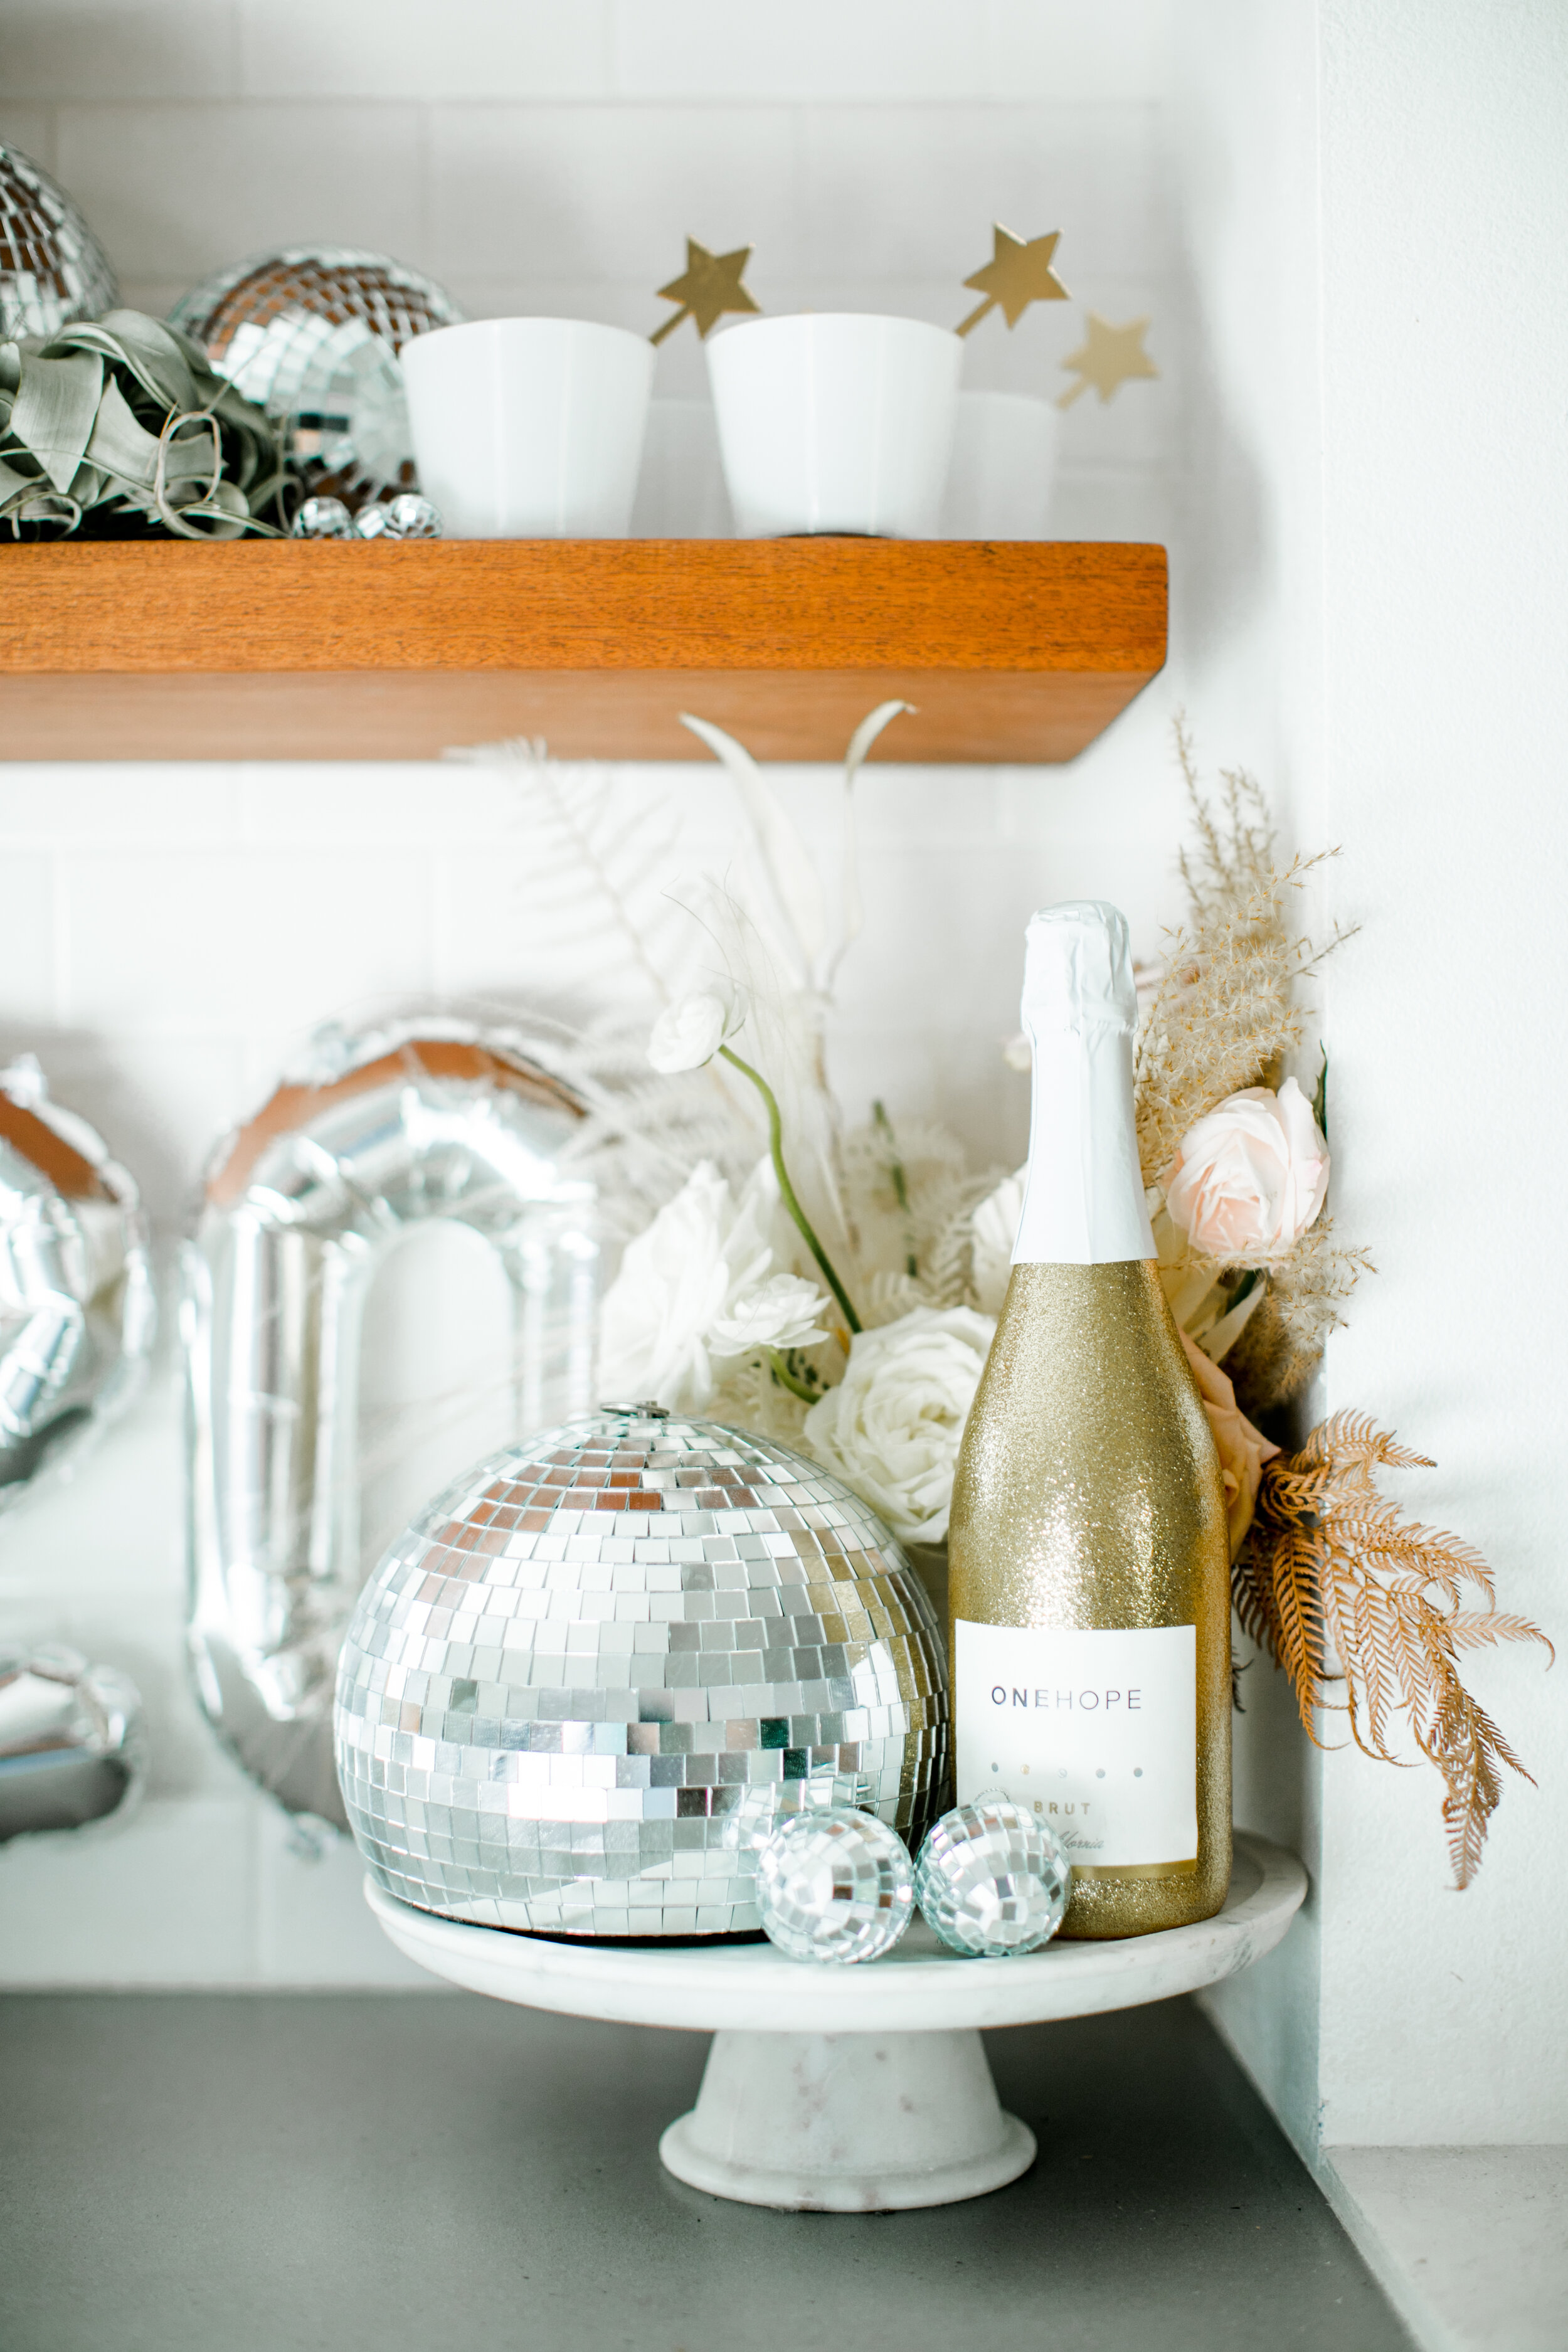 Mixed metallic NYE party inspiration - Champagne Bar - Get more New Year’s Eve decor ideas now at minteventdesign.com!